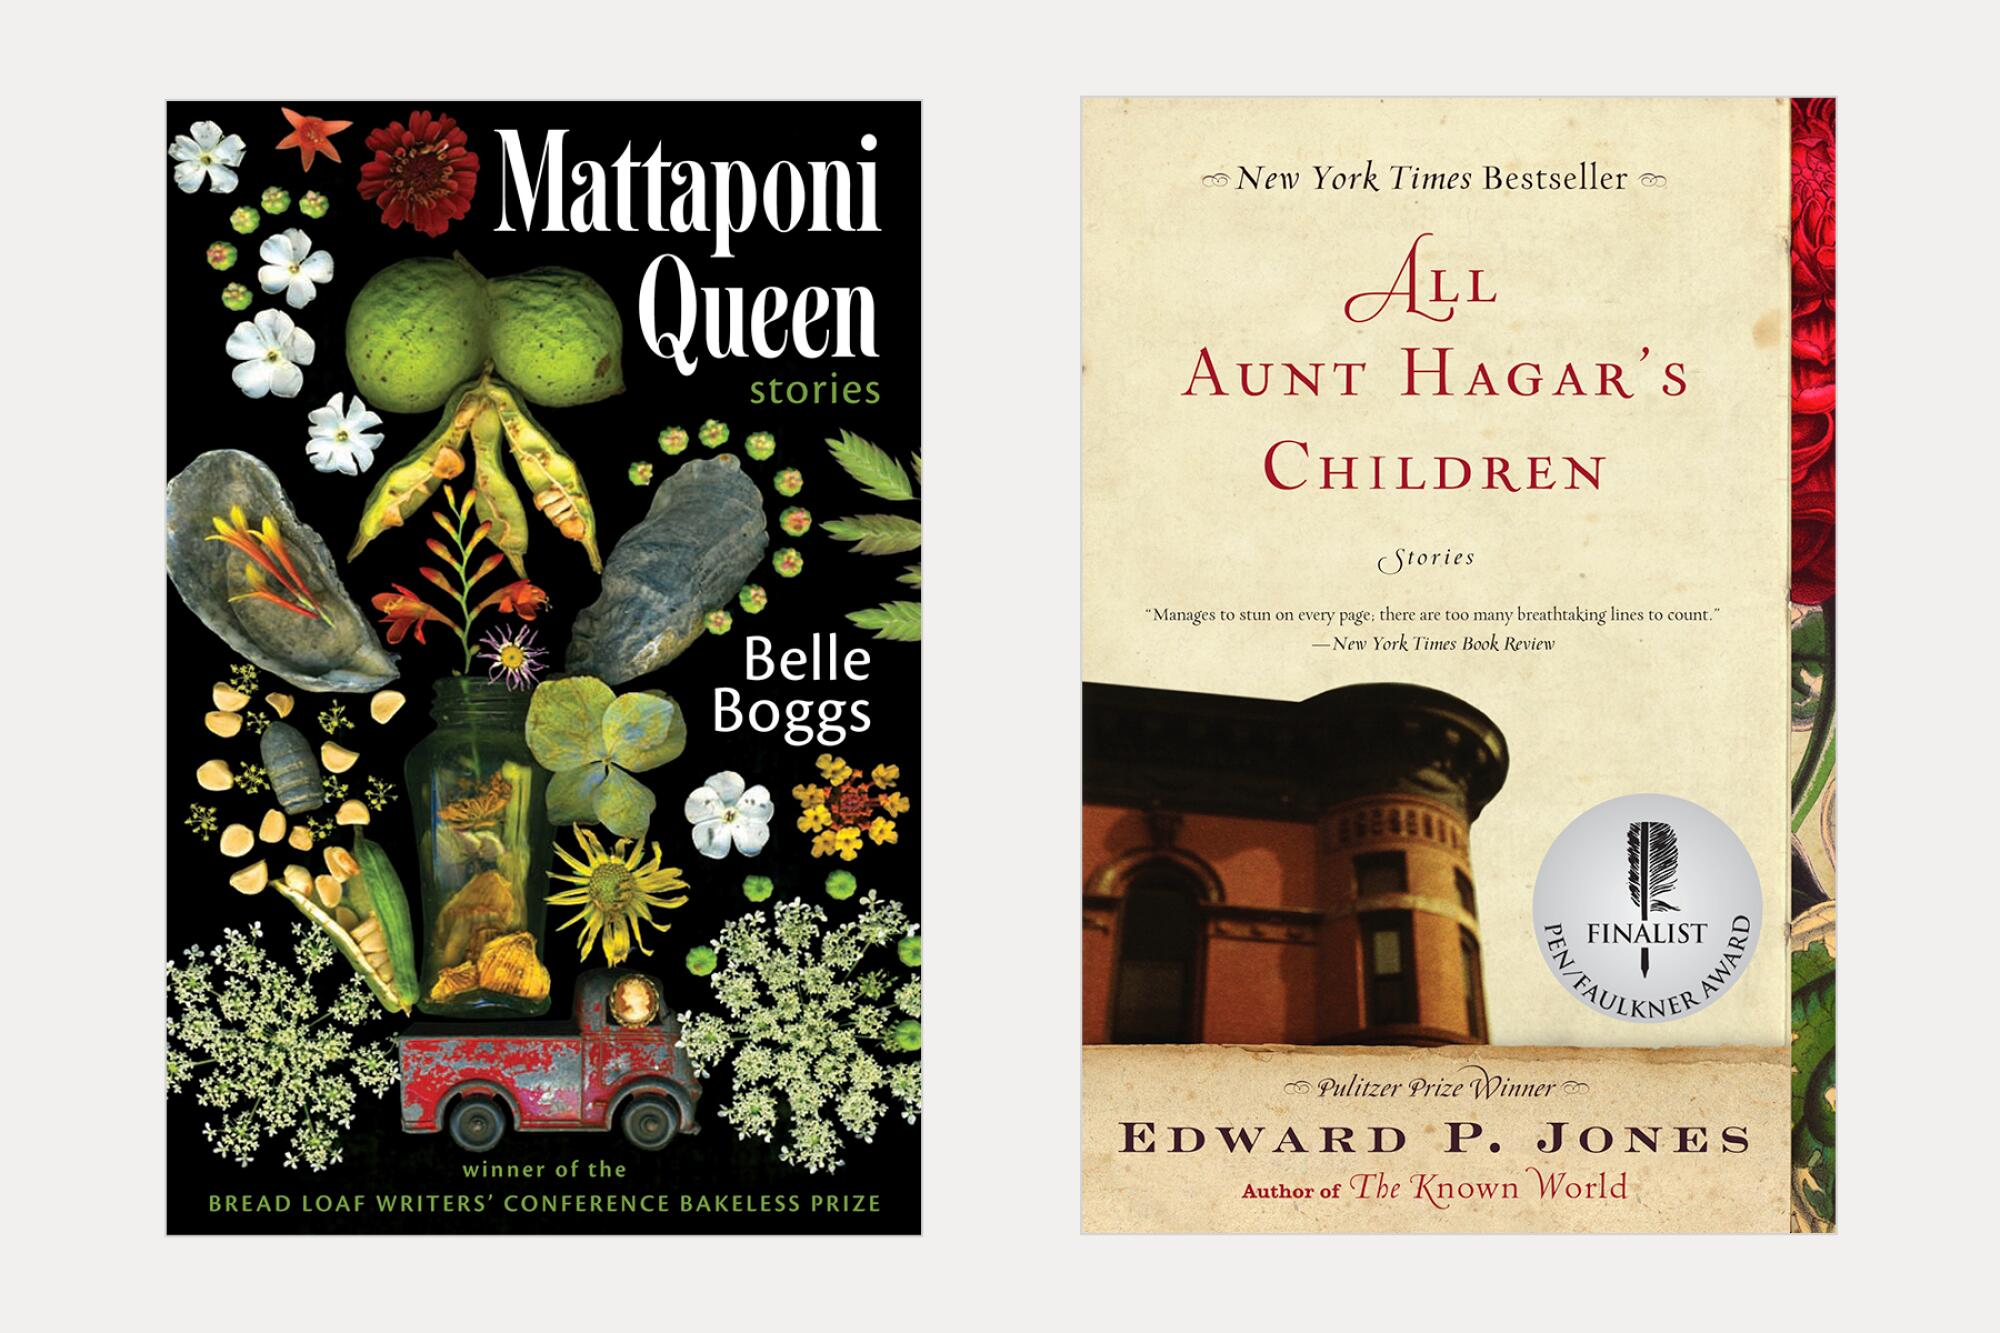 two book covers: Mattaponi Queen by Belle Boggs, and All Aunt Hagar's Children by Edward P. Jones